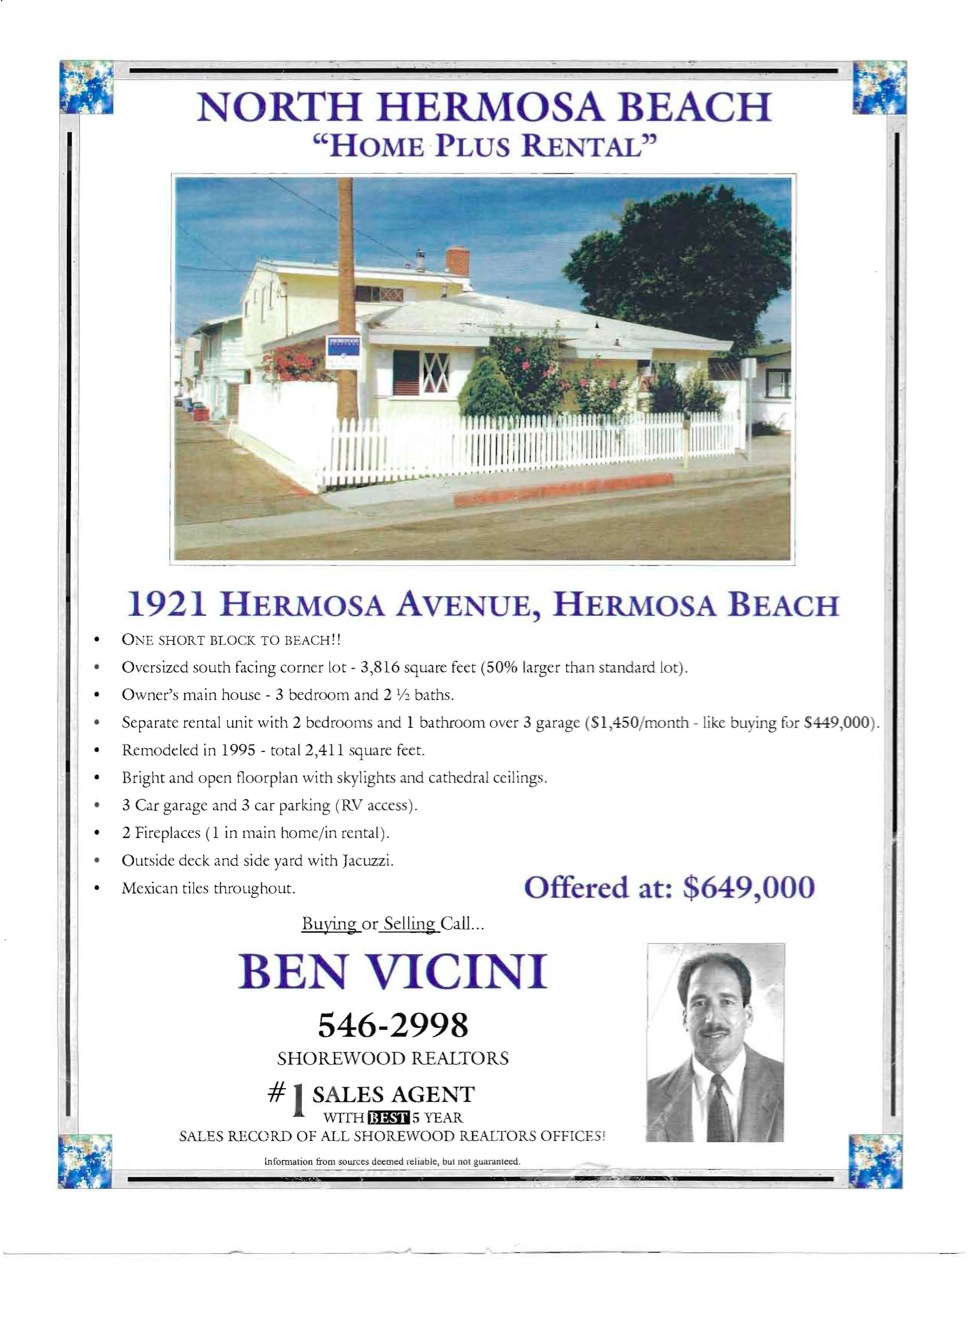 Vicini's Past Listings & Sales_Page_59